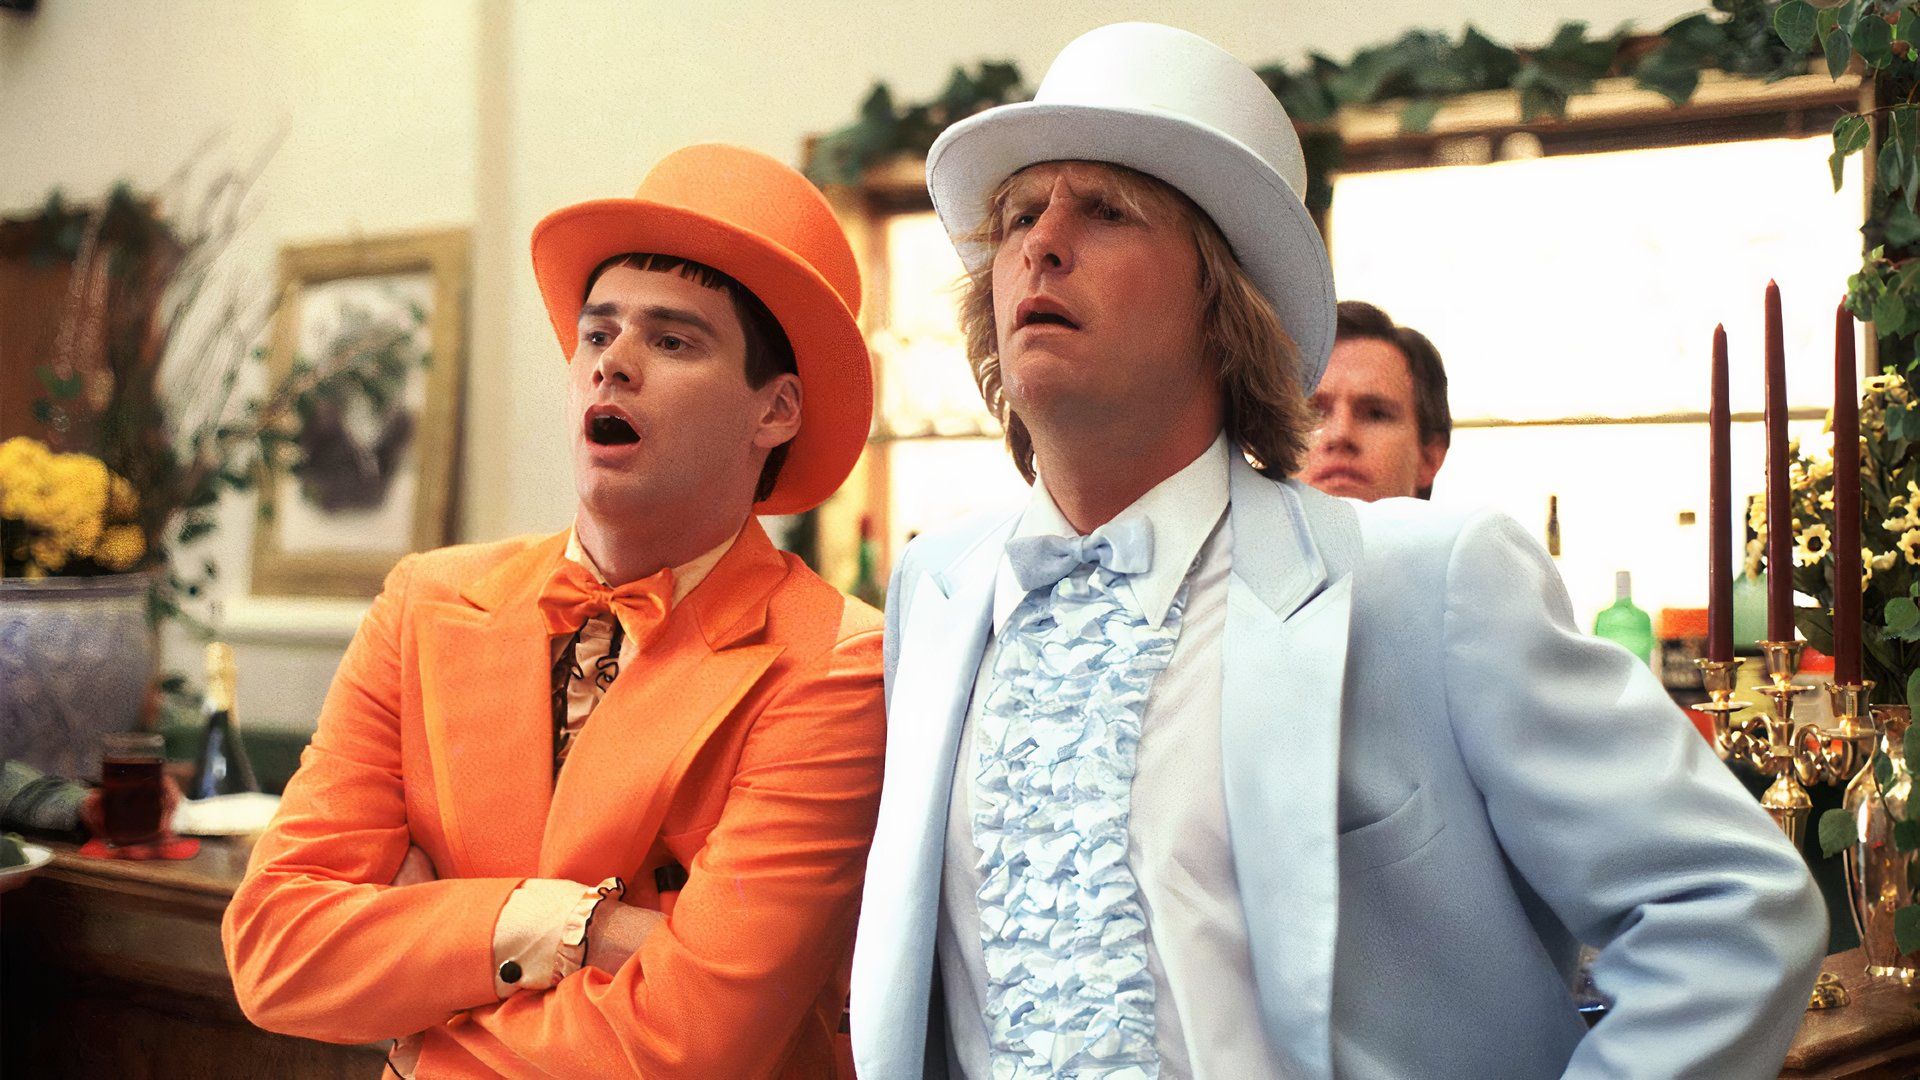 Jim Carrey and Jeff Daniels in Dumb and Dumber in suits